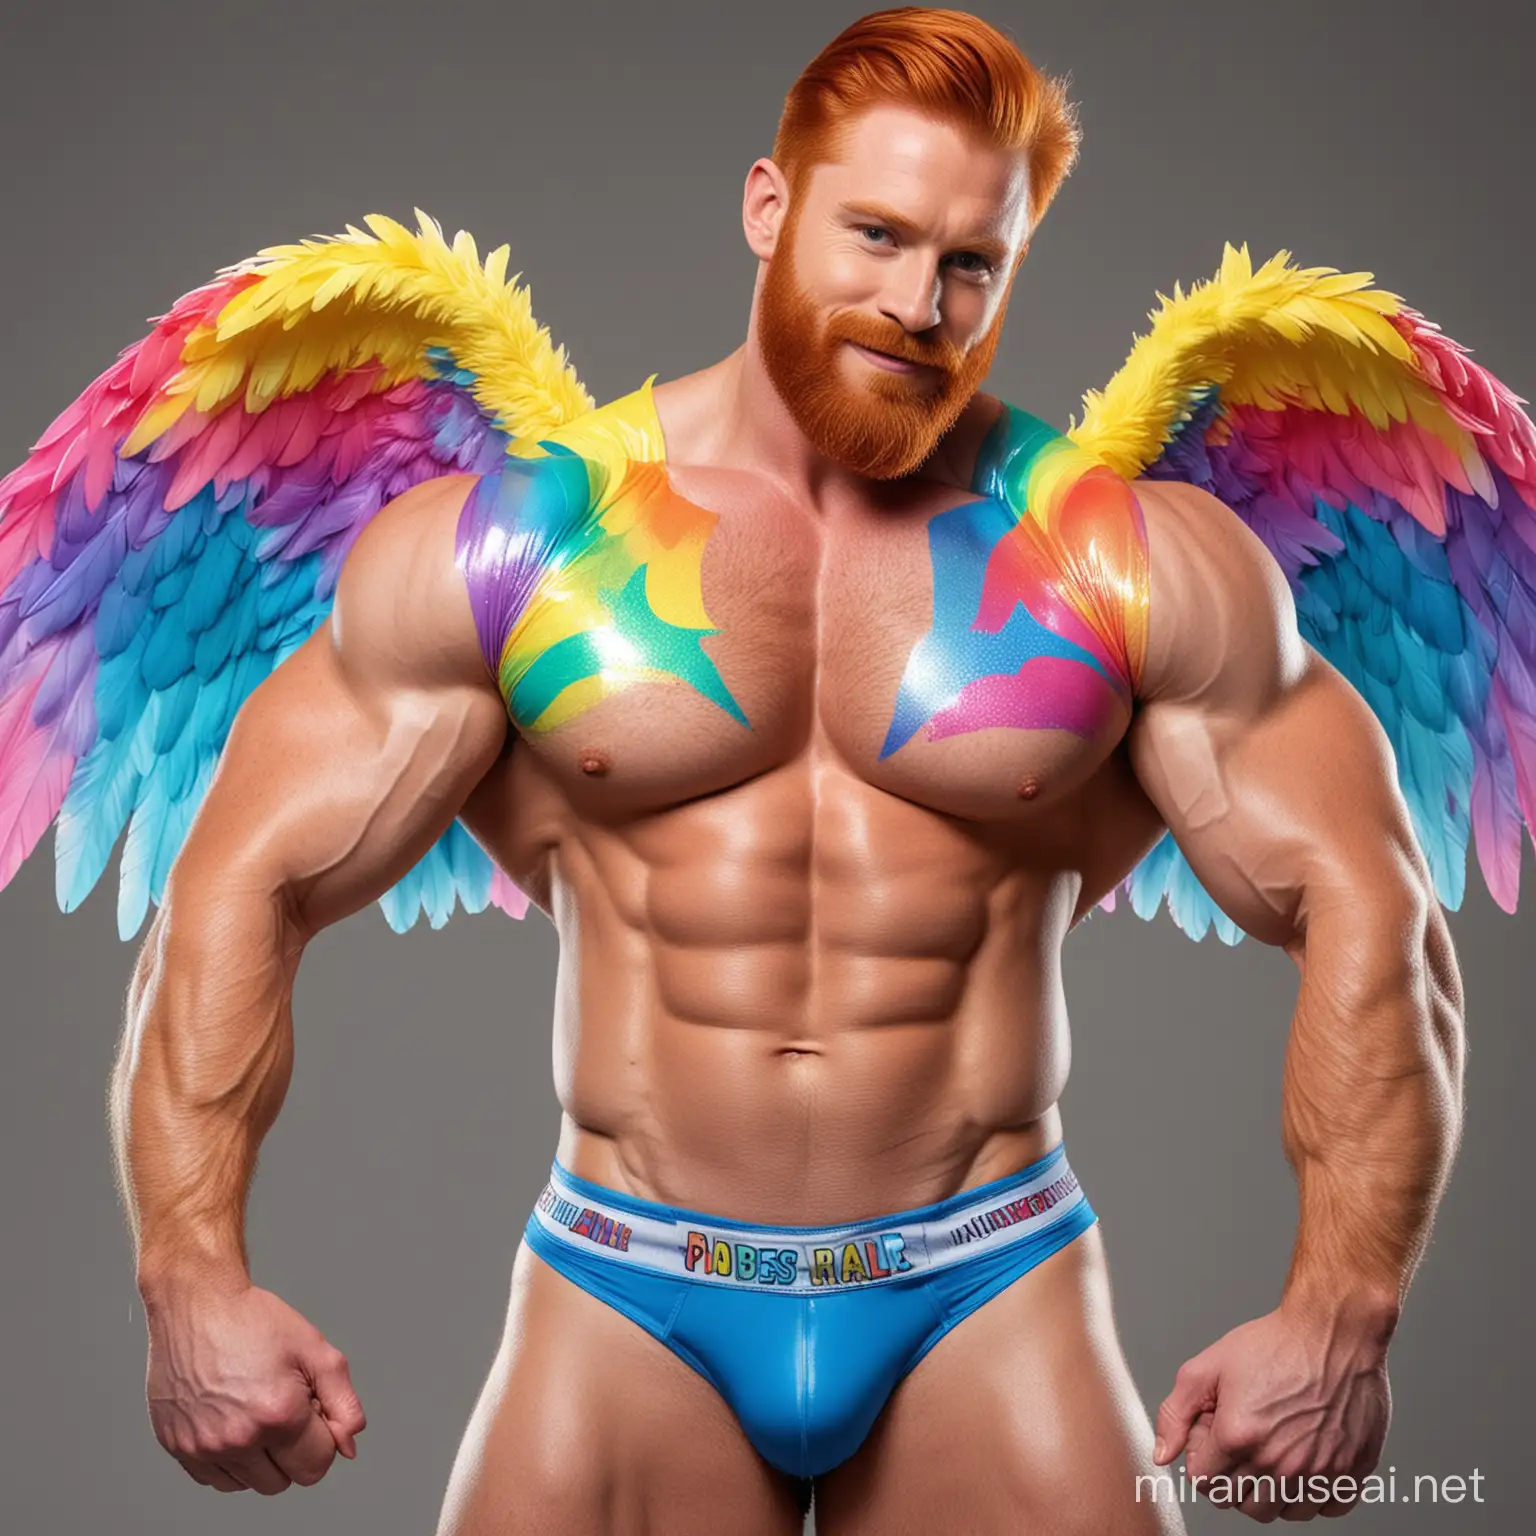 Topless 30s Ultra Beefy Redhead IFBB Bodybuilder Beard Daddy wearing Multi-Highlighter Bright Rainbow Coloured Eagle Wings See Through Jacket and Flexing Big Strong Arm with doraemon